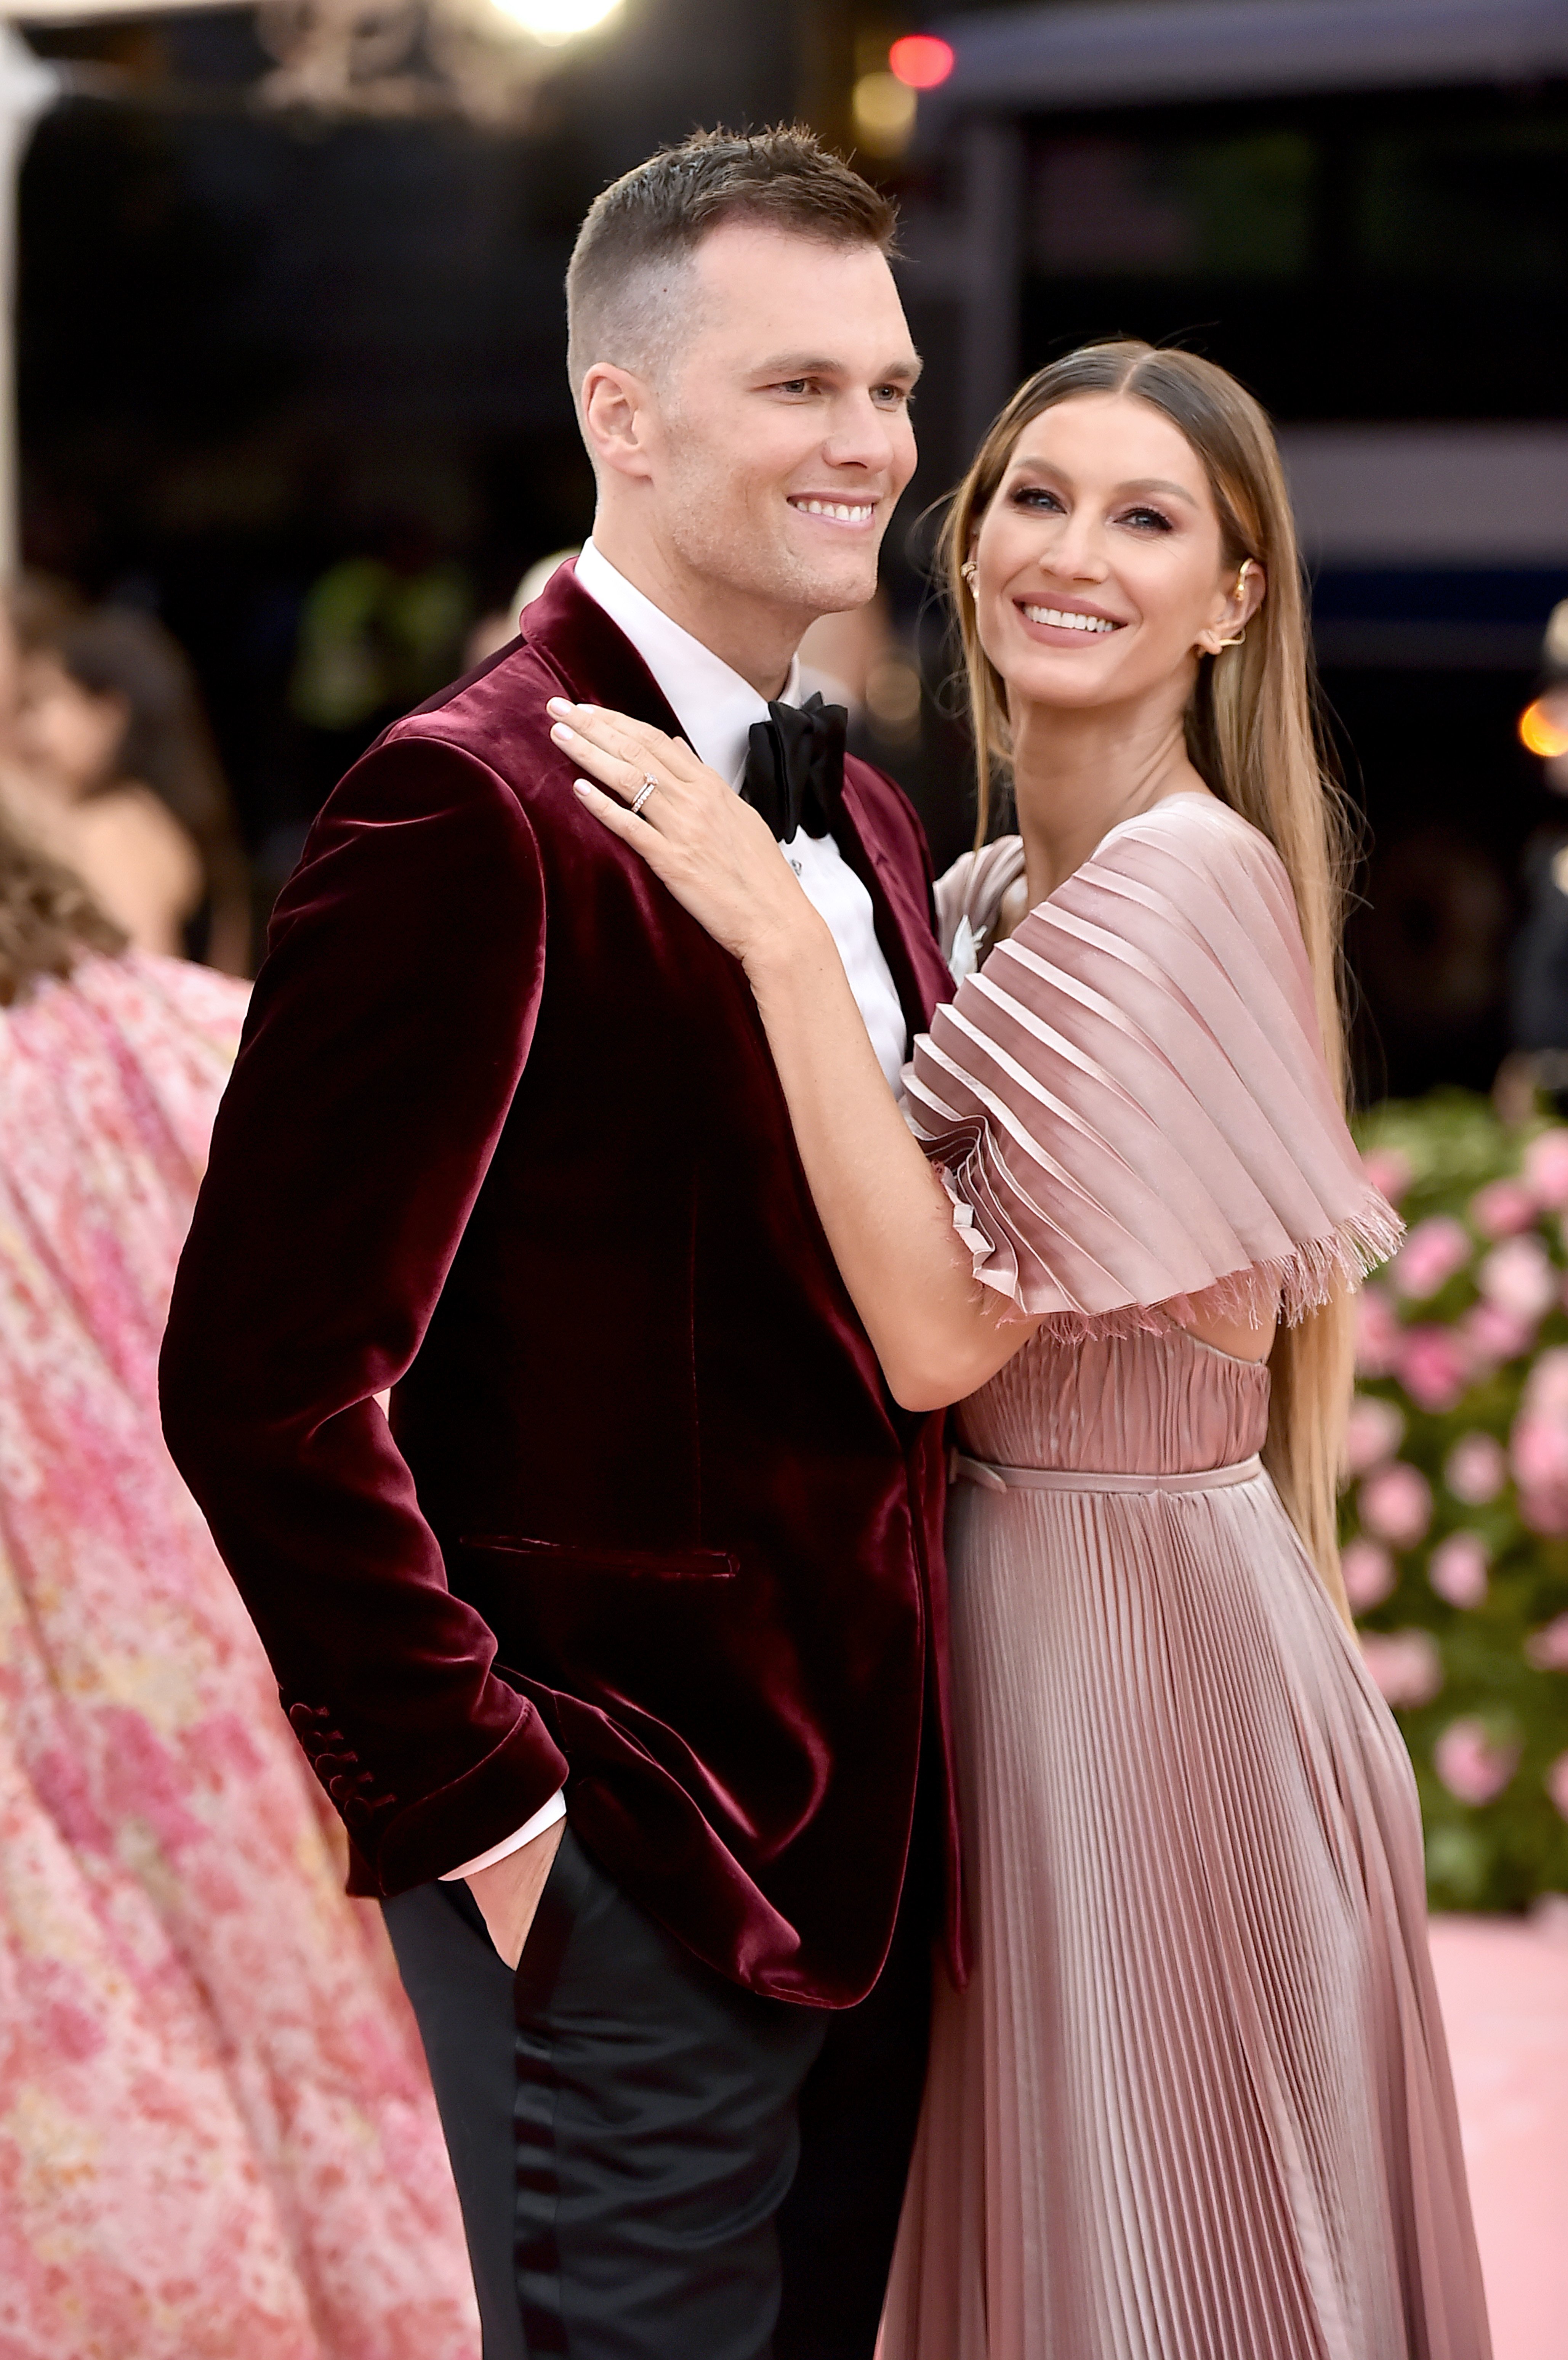 Tom Brady and Gisele Bündchen attend The 2019 Met Gala Celebrating Camp: Notes on Fashion at Metropolitan Museum of Art on May 06, 2019 in New York City | Photo: Getty Images